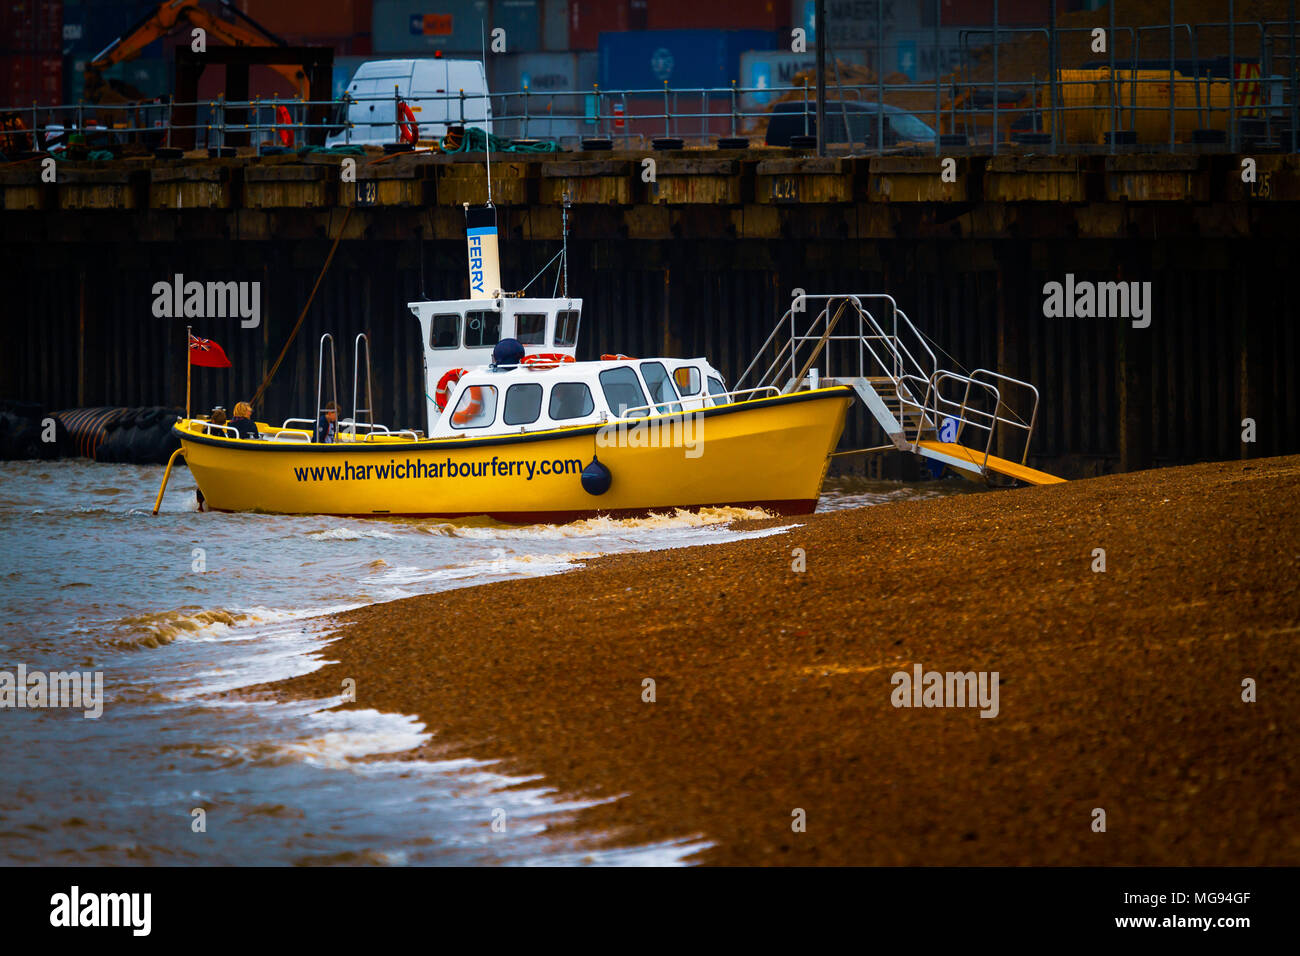 Harwich Harbour Ferry Stock Photo